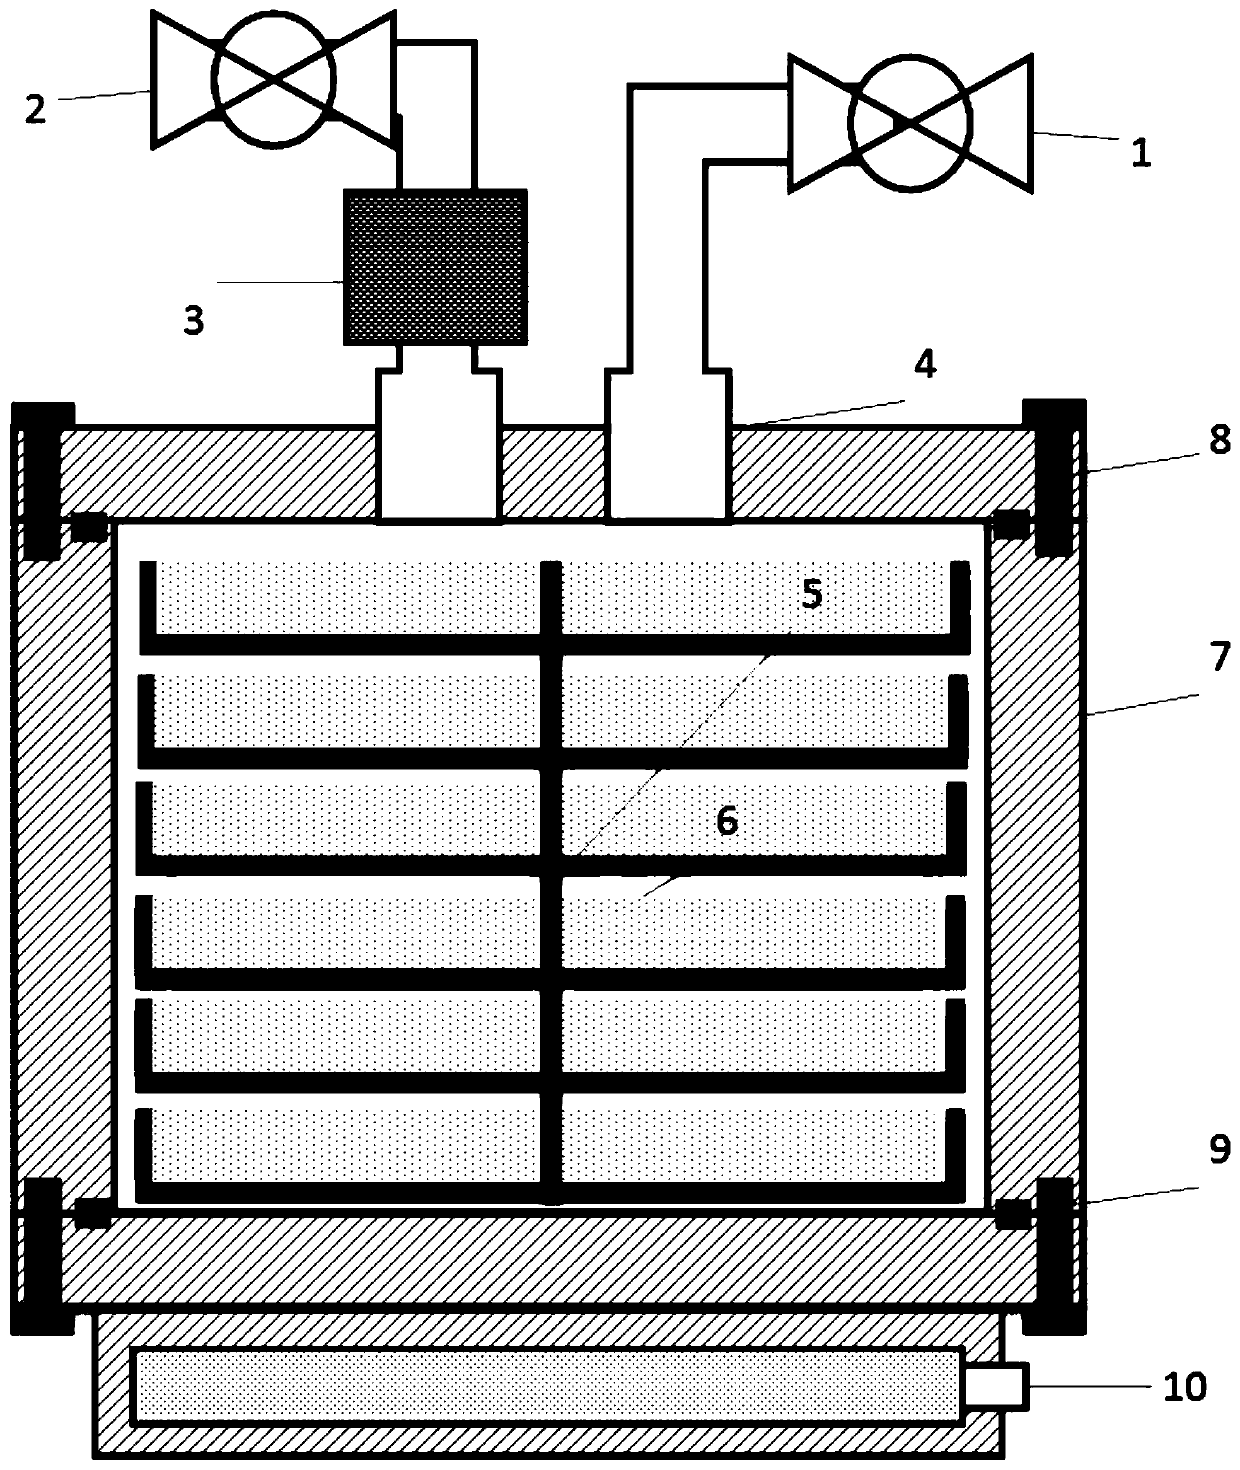 A hydrate-based energy storage device and method based on metal-organic framework materials